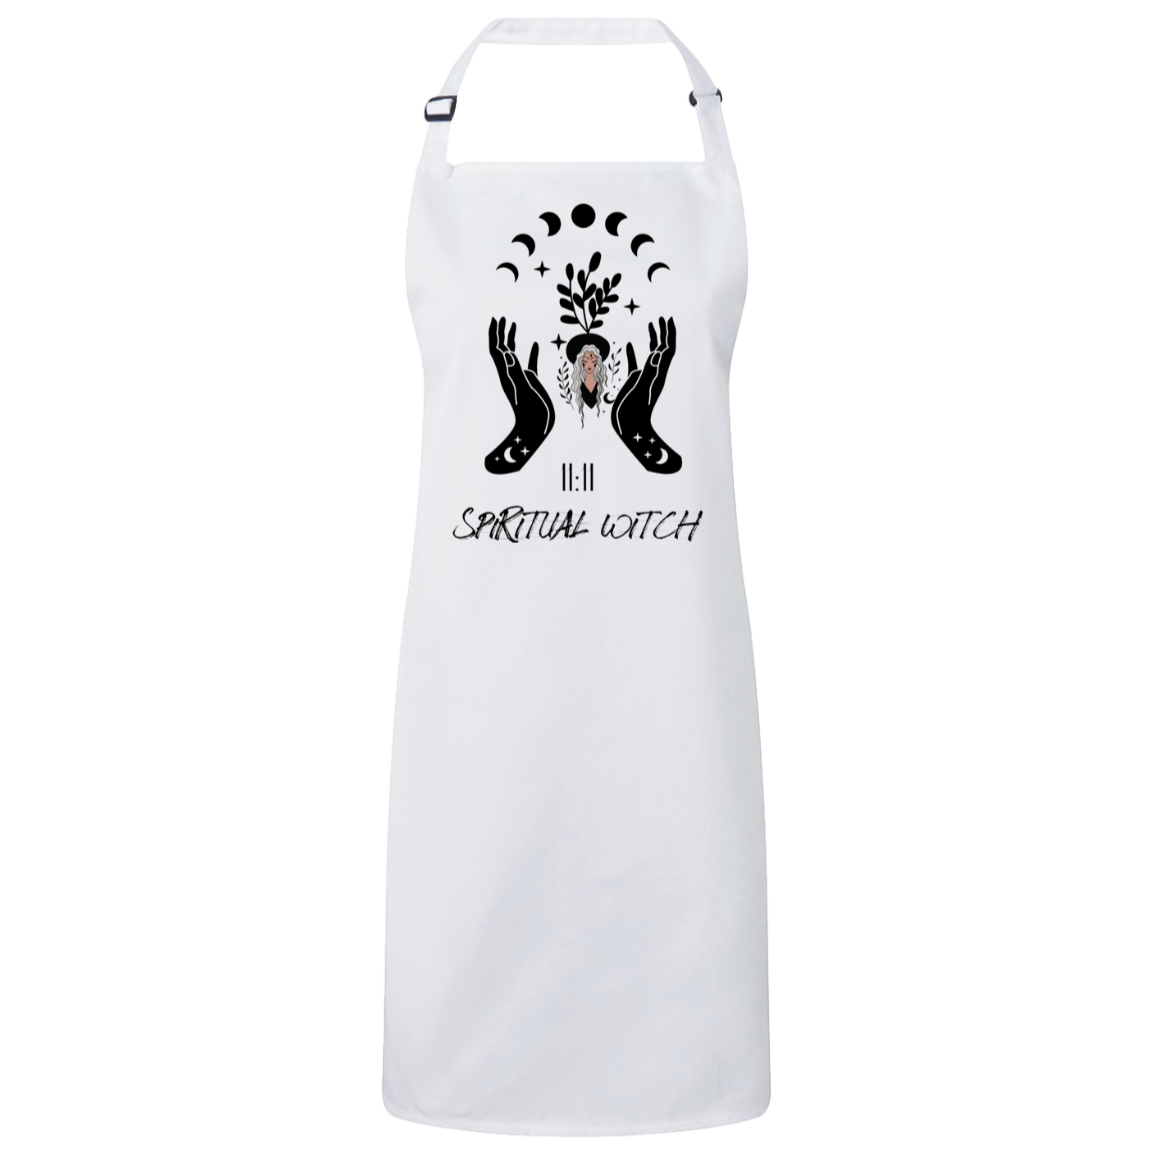 SPIRITUAL WITCH Apron for the kitchen witch!